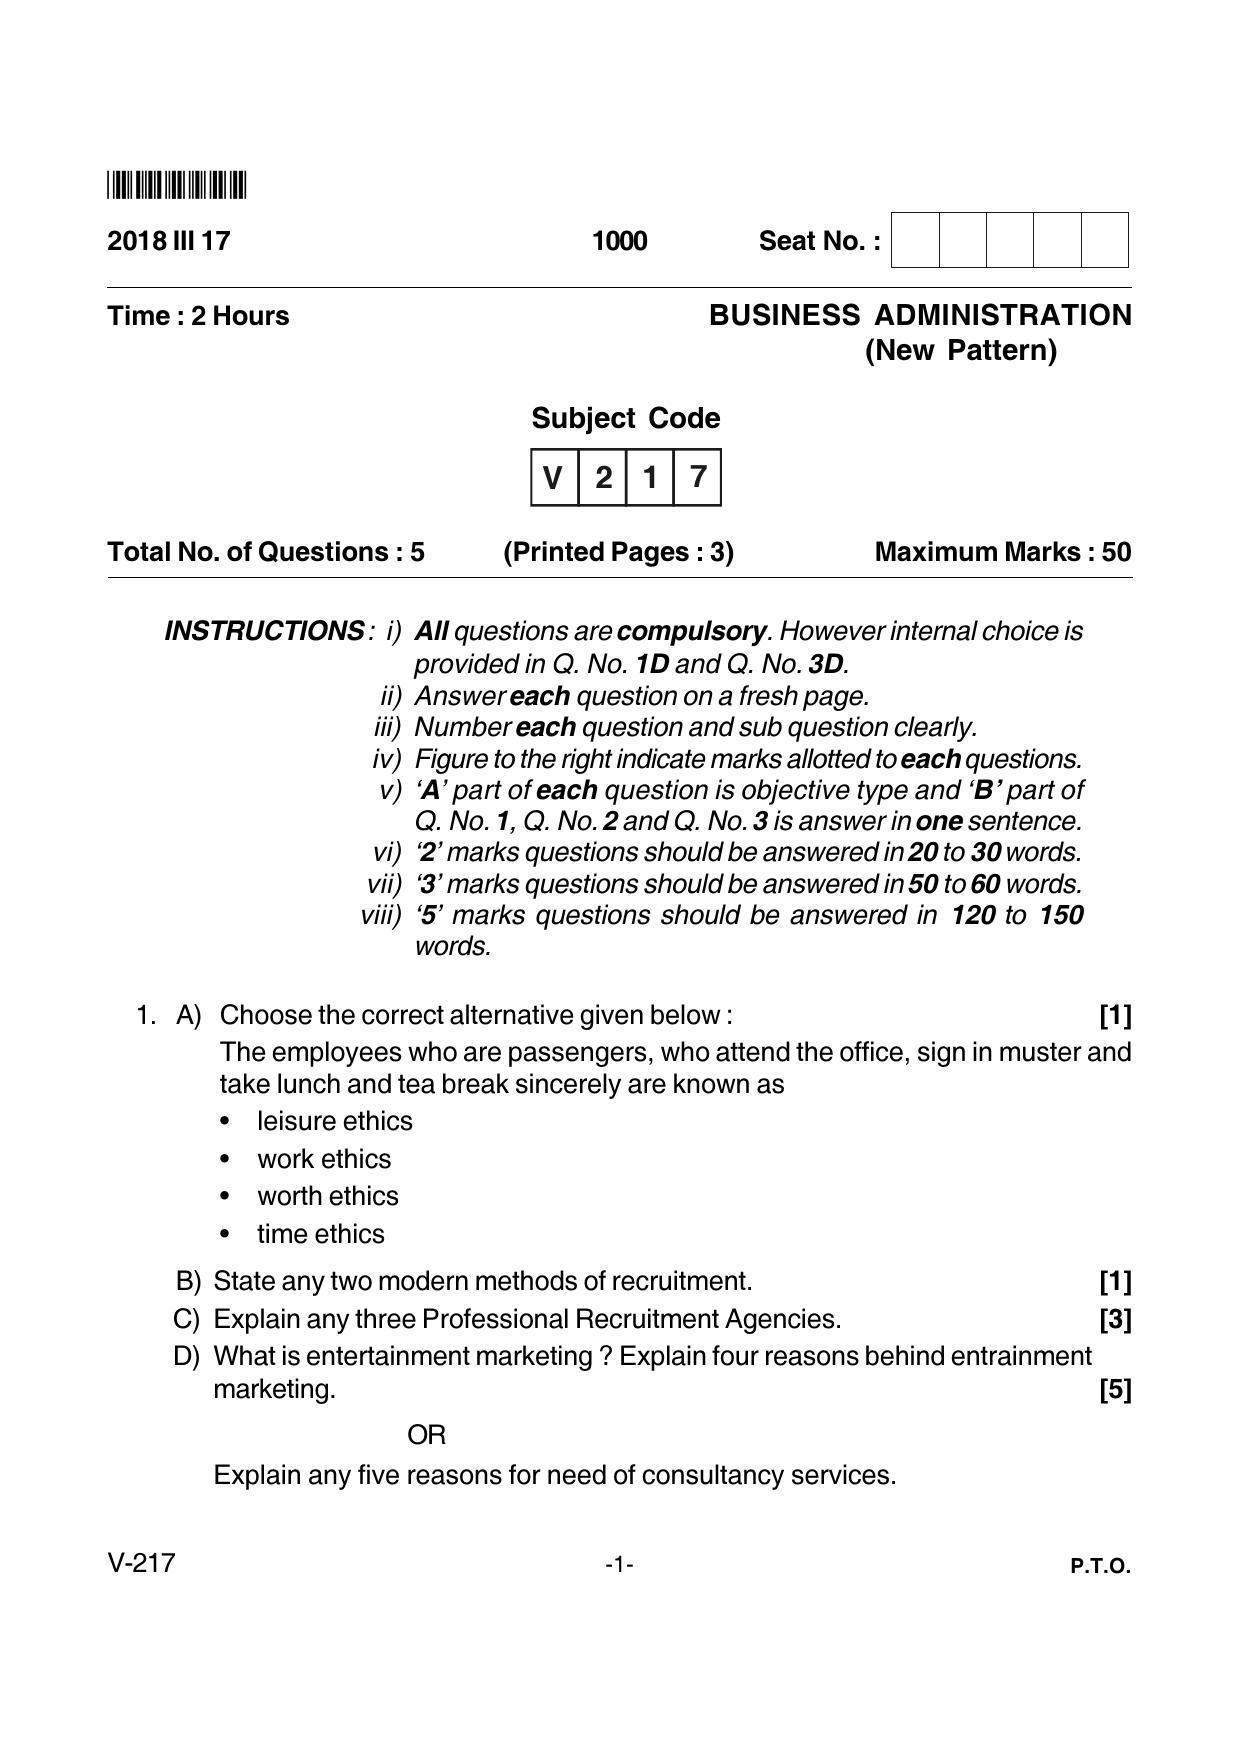 Goa Board Class 12 Business Administration  Voc 217 New Pattern (March 2018) Question Paper - Page 1